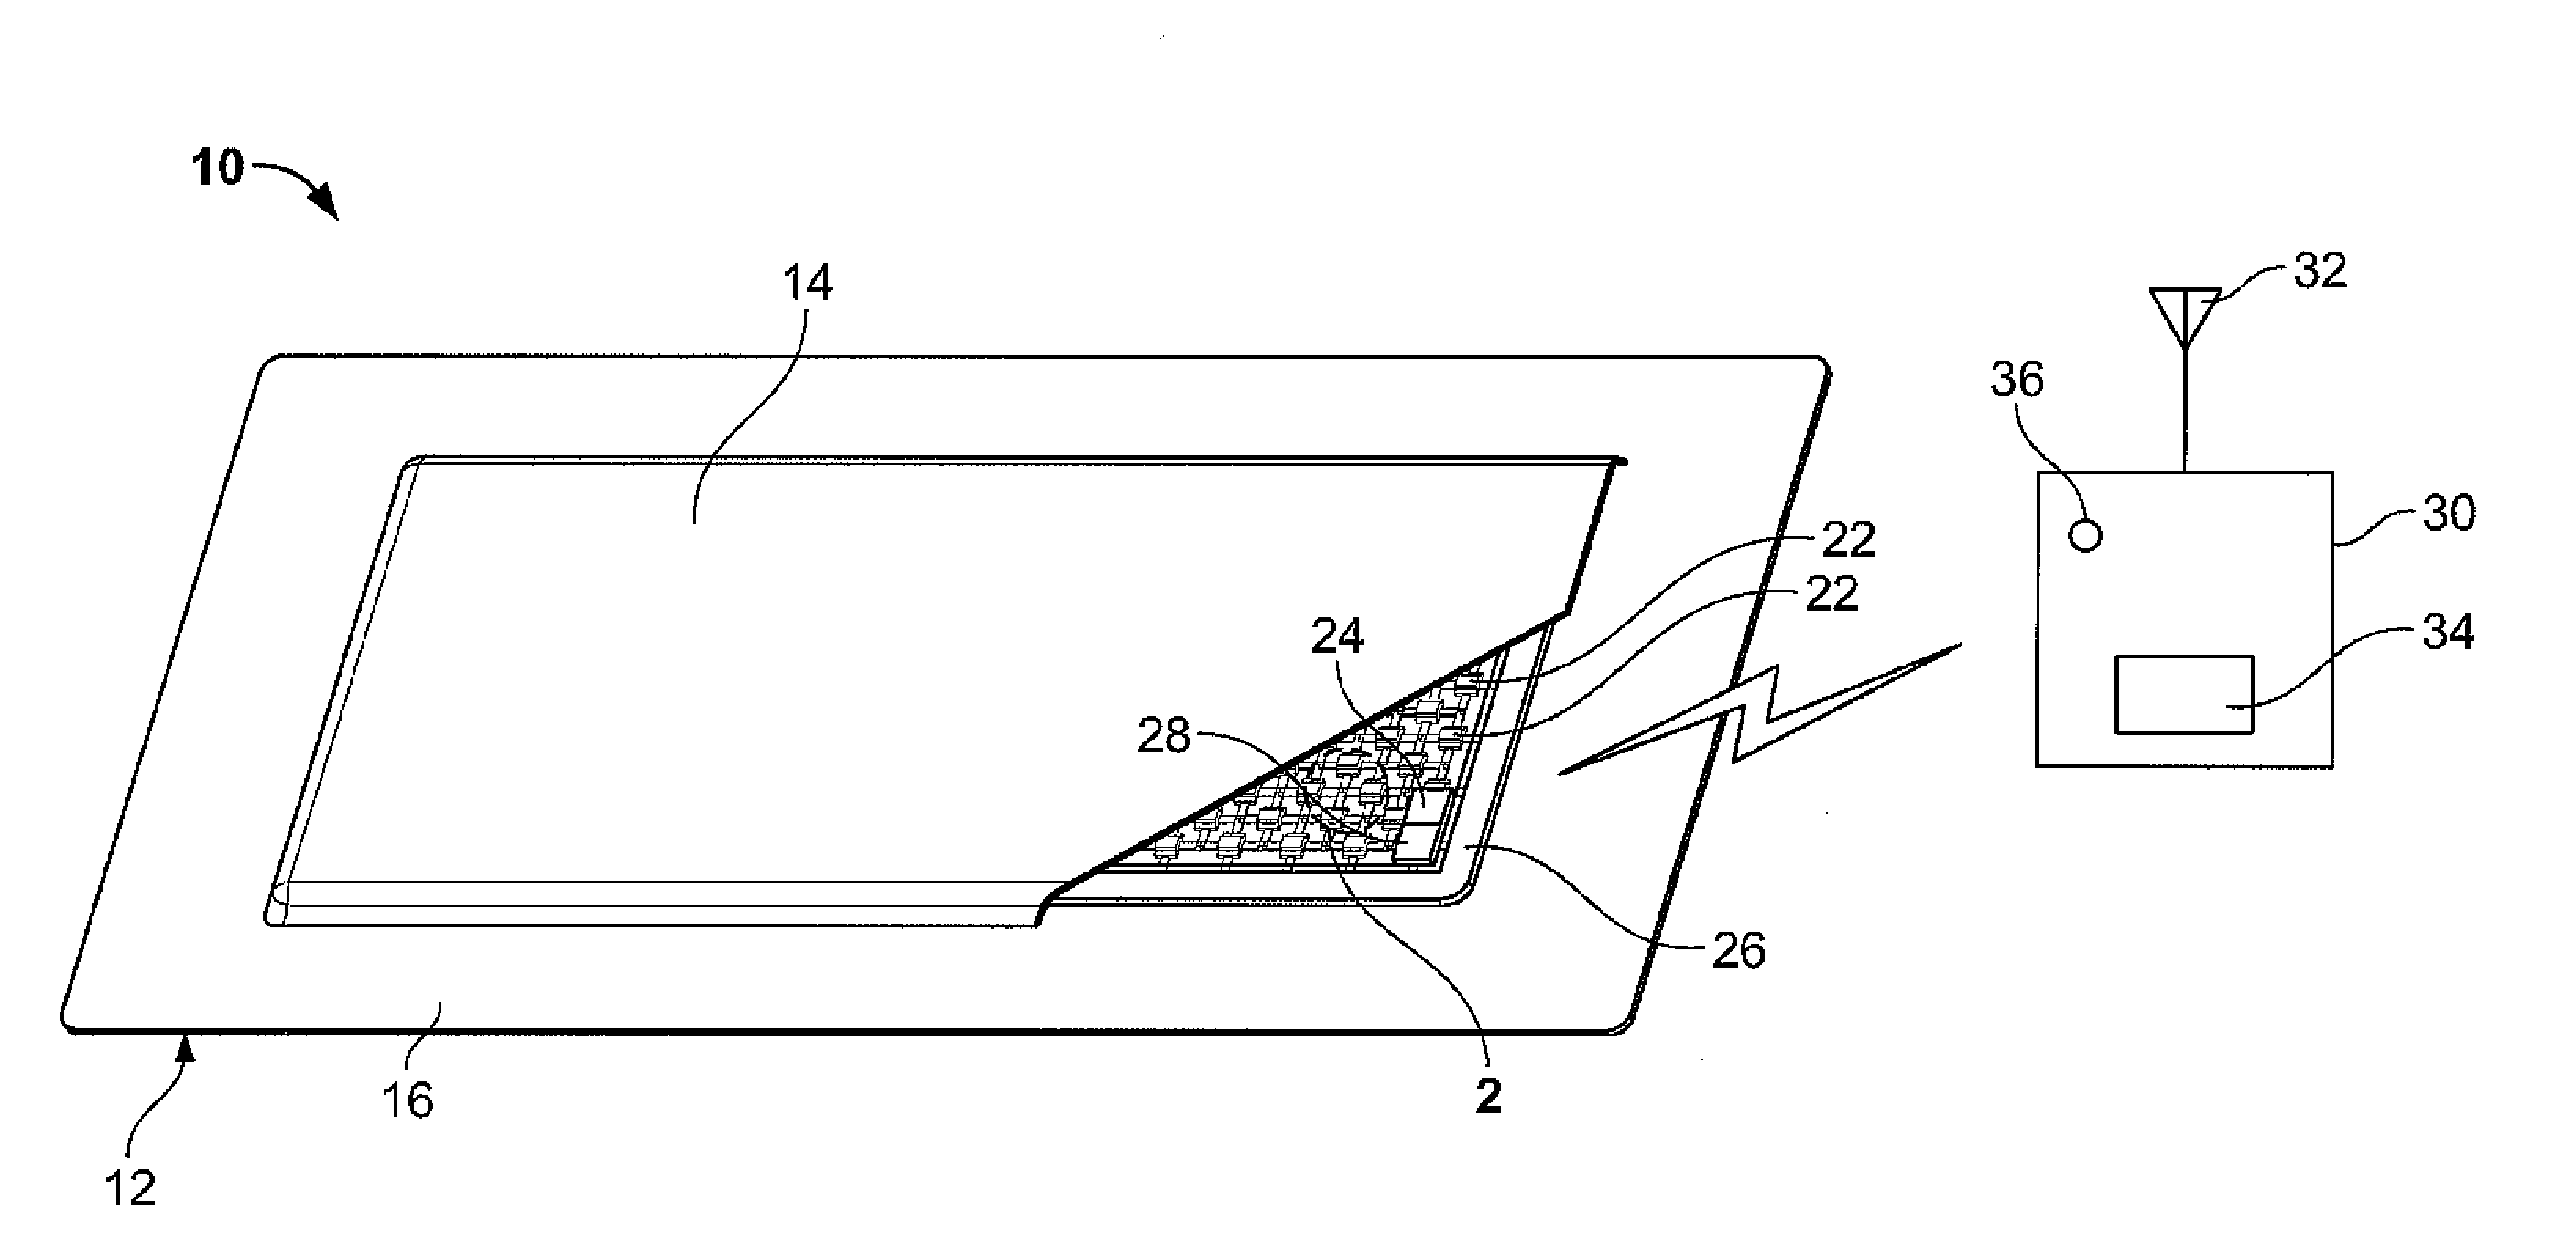 Remote monitoring diaper system, kit and method of using